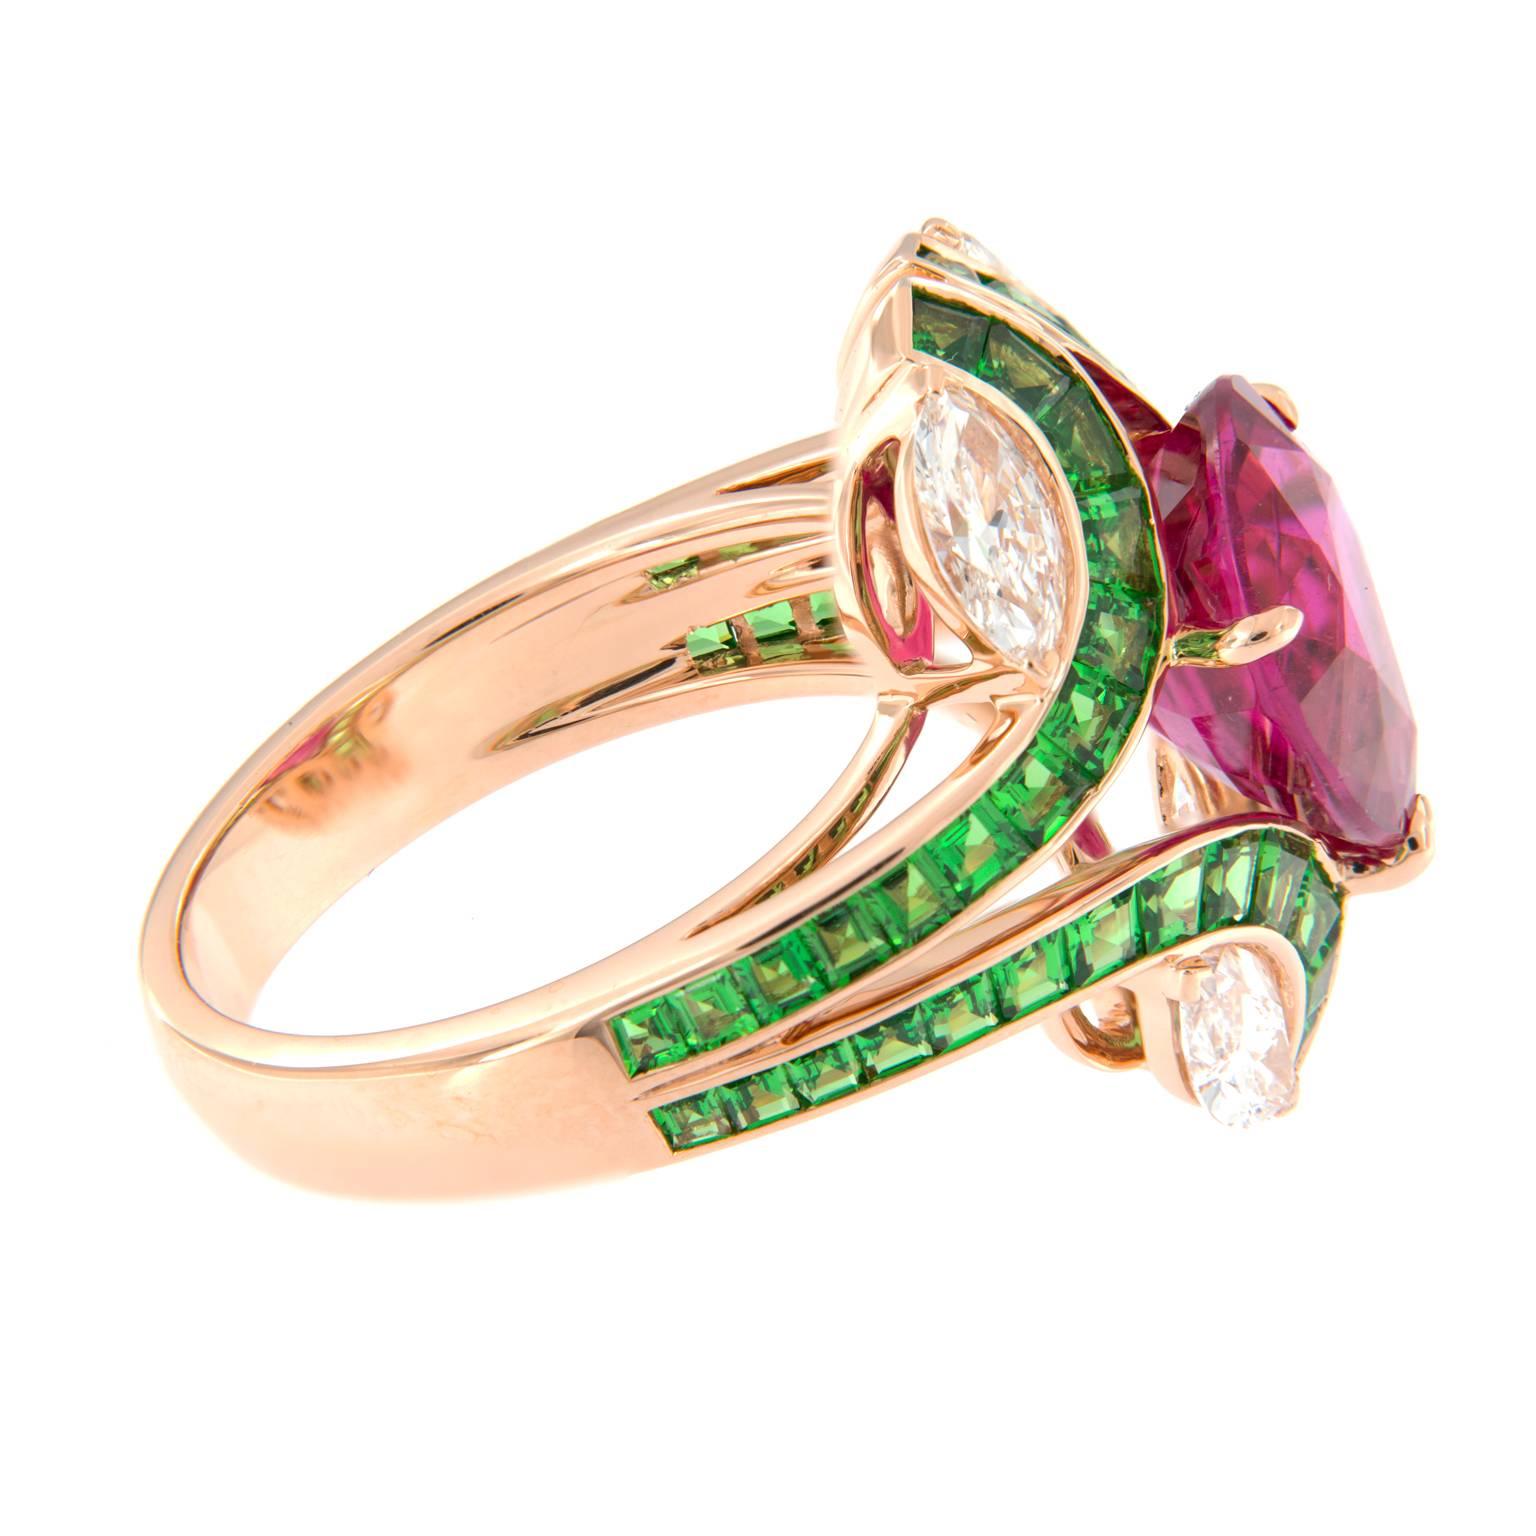 Stunning, colorful cocktail ring centers around a 3.5 carat ruby accented with tsavorite and diamonds. Expertly crafted in 18k rose gold. Ring size 6.75.Weighs 7.6 grams. 

Ruby 3.5 ct
Diamond 1.05 cttw
Tsavorite 1.88 ct
